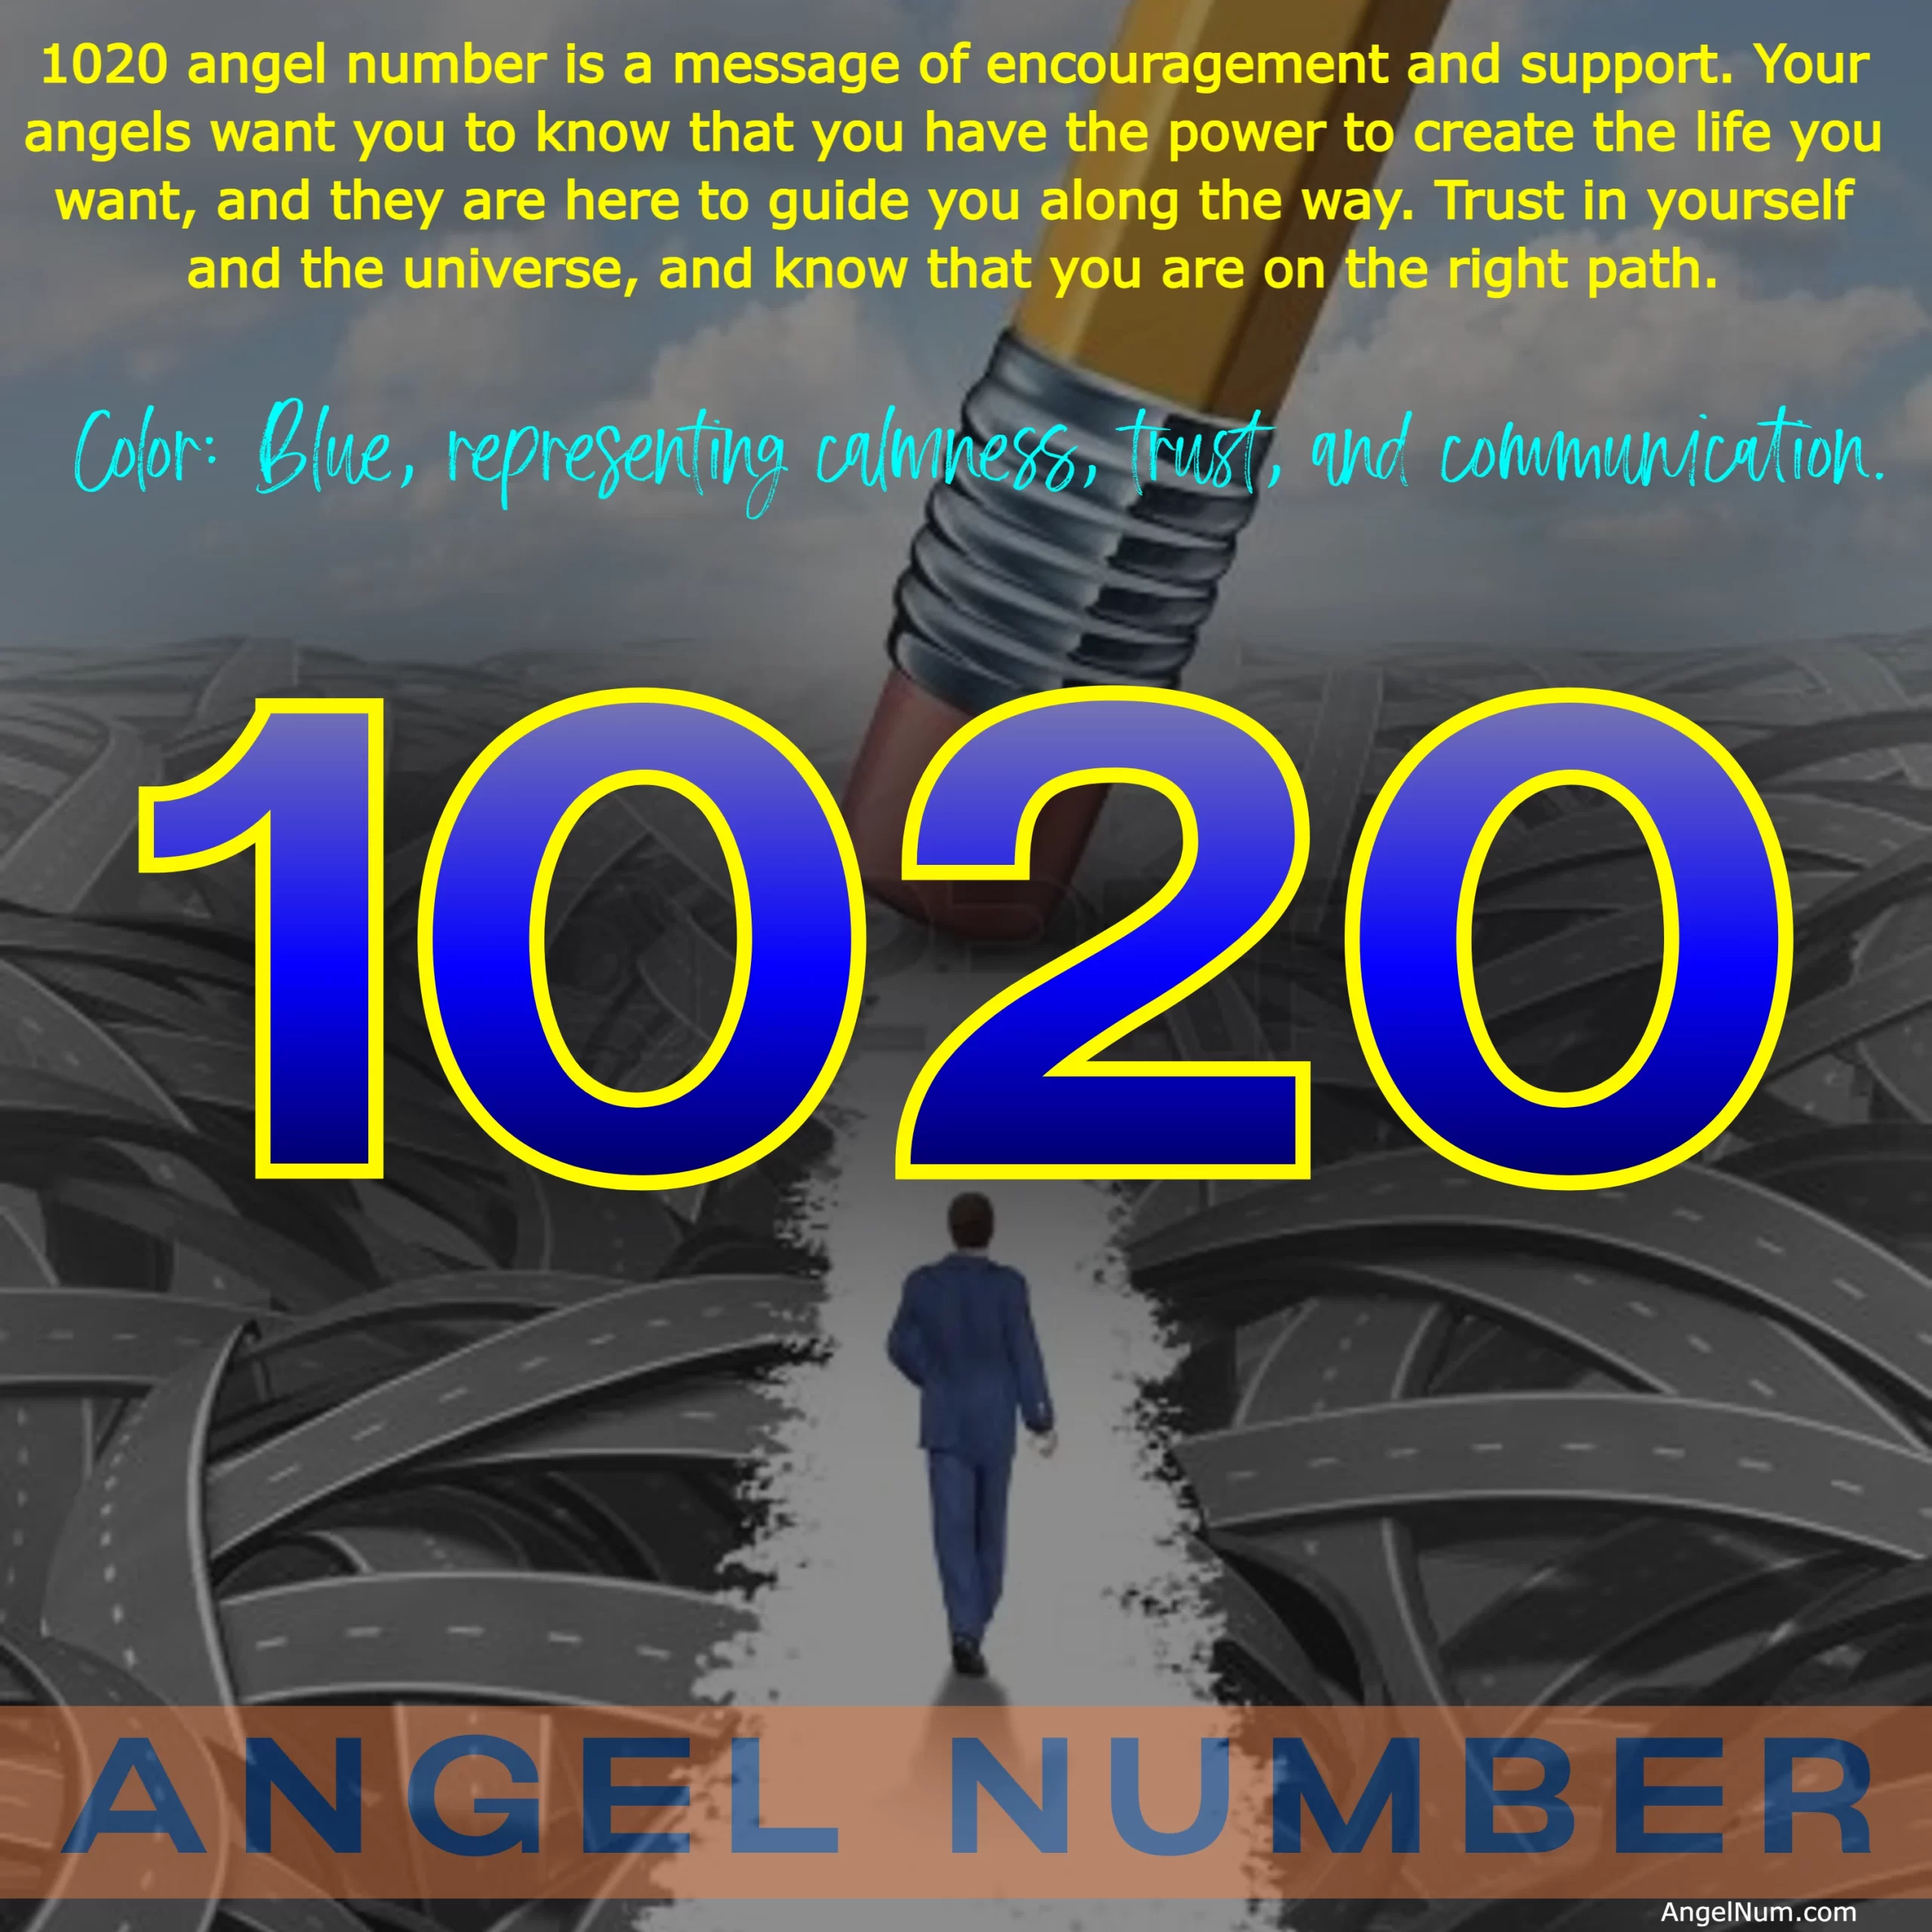 Angel Number 1020: Meaning, Symbolism, and Guidance